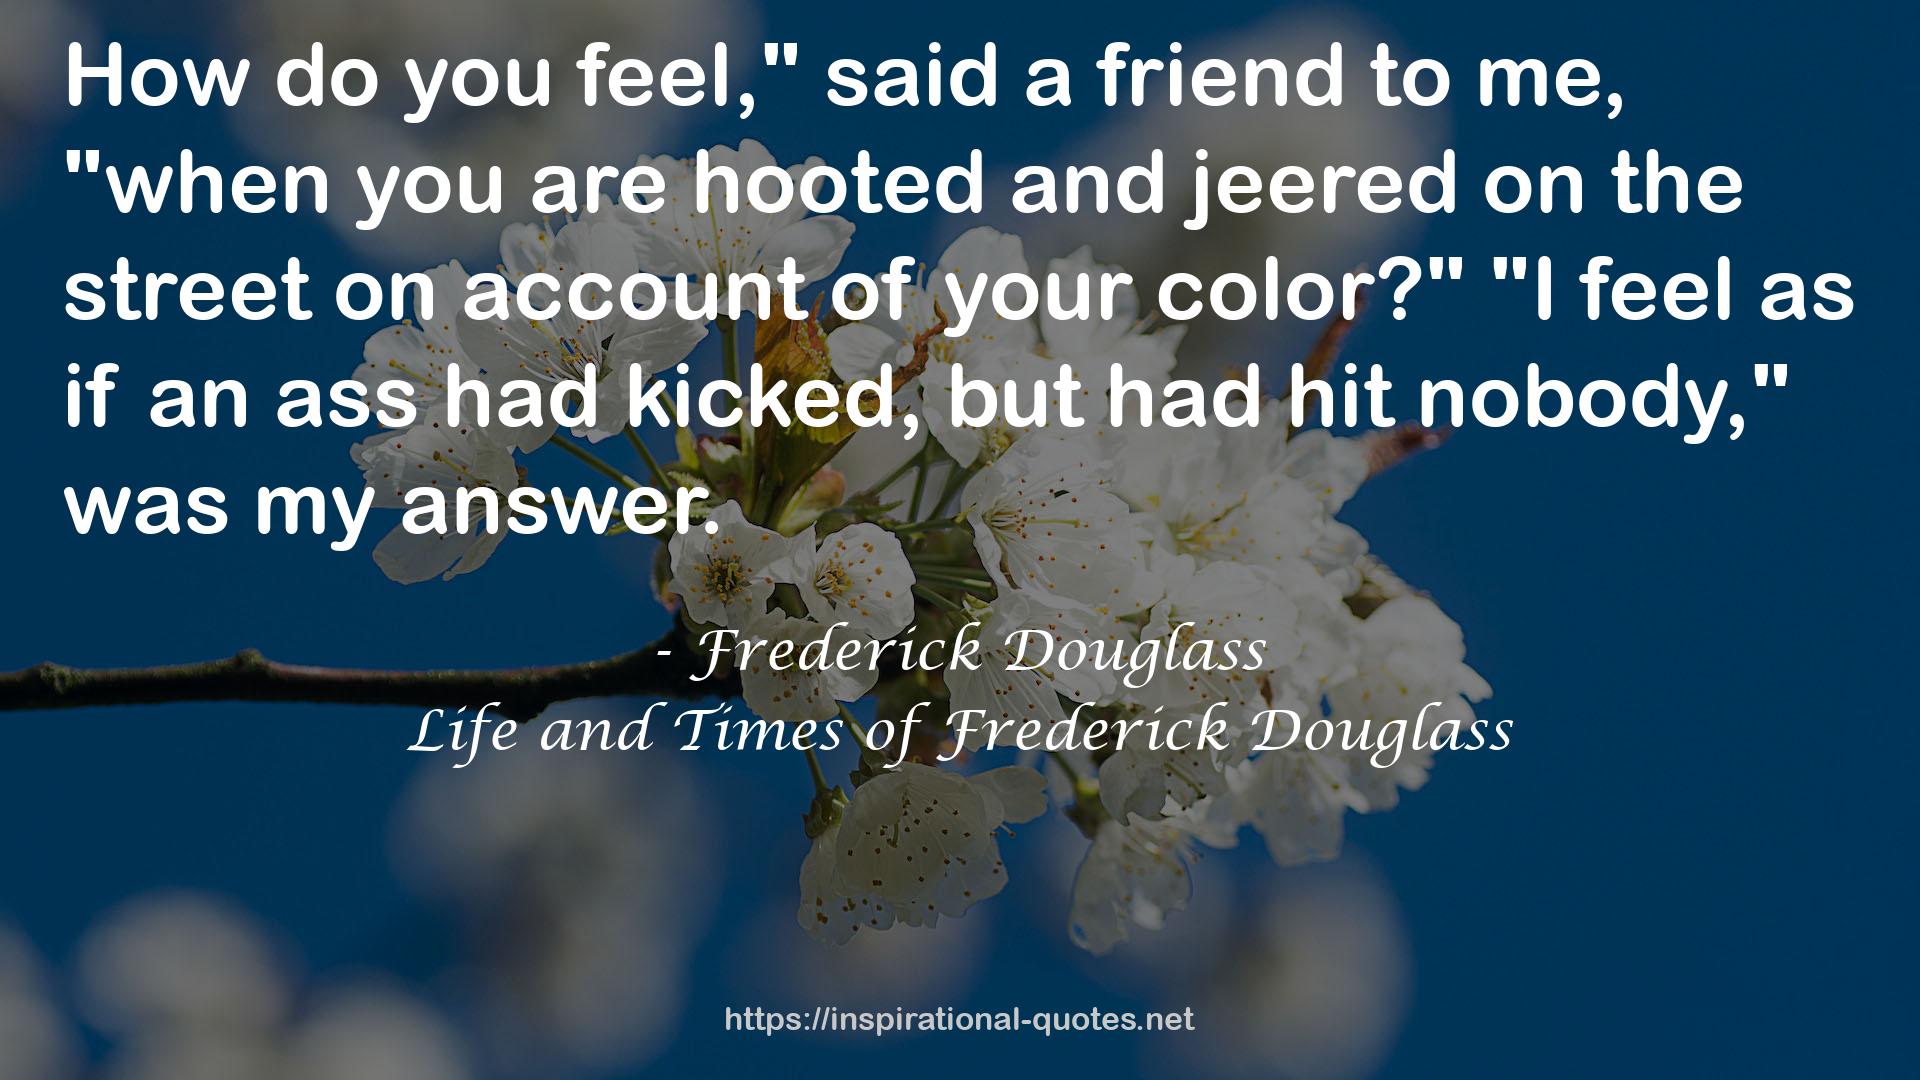 Life and Times of Frederick Douglass QUOTES